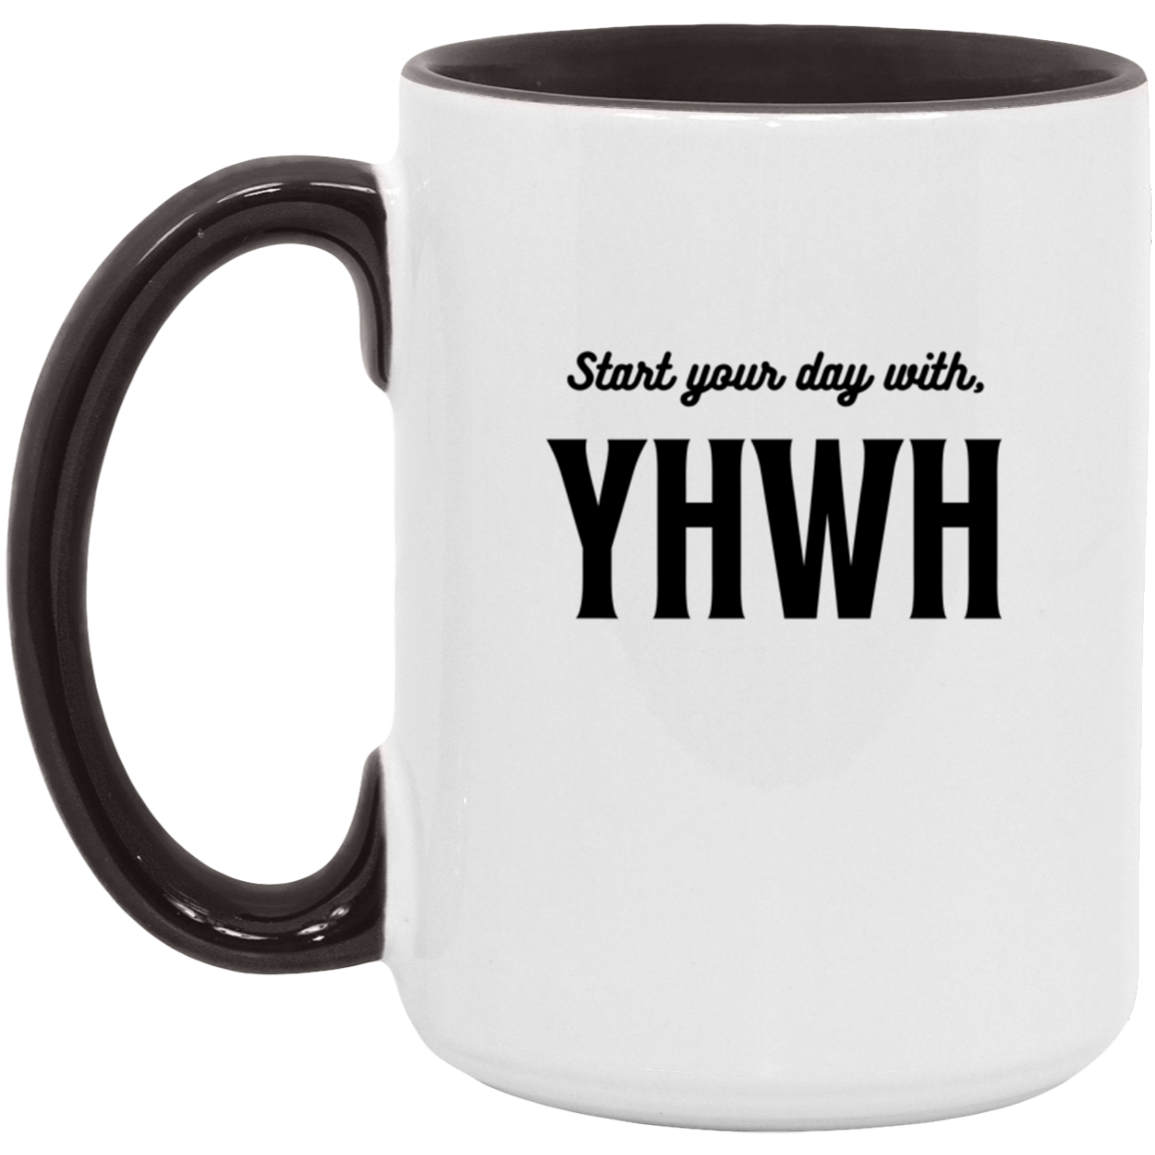 Start your day with YHWH Accent Mug Faith Based